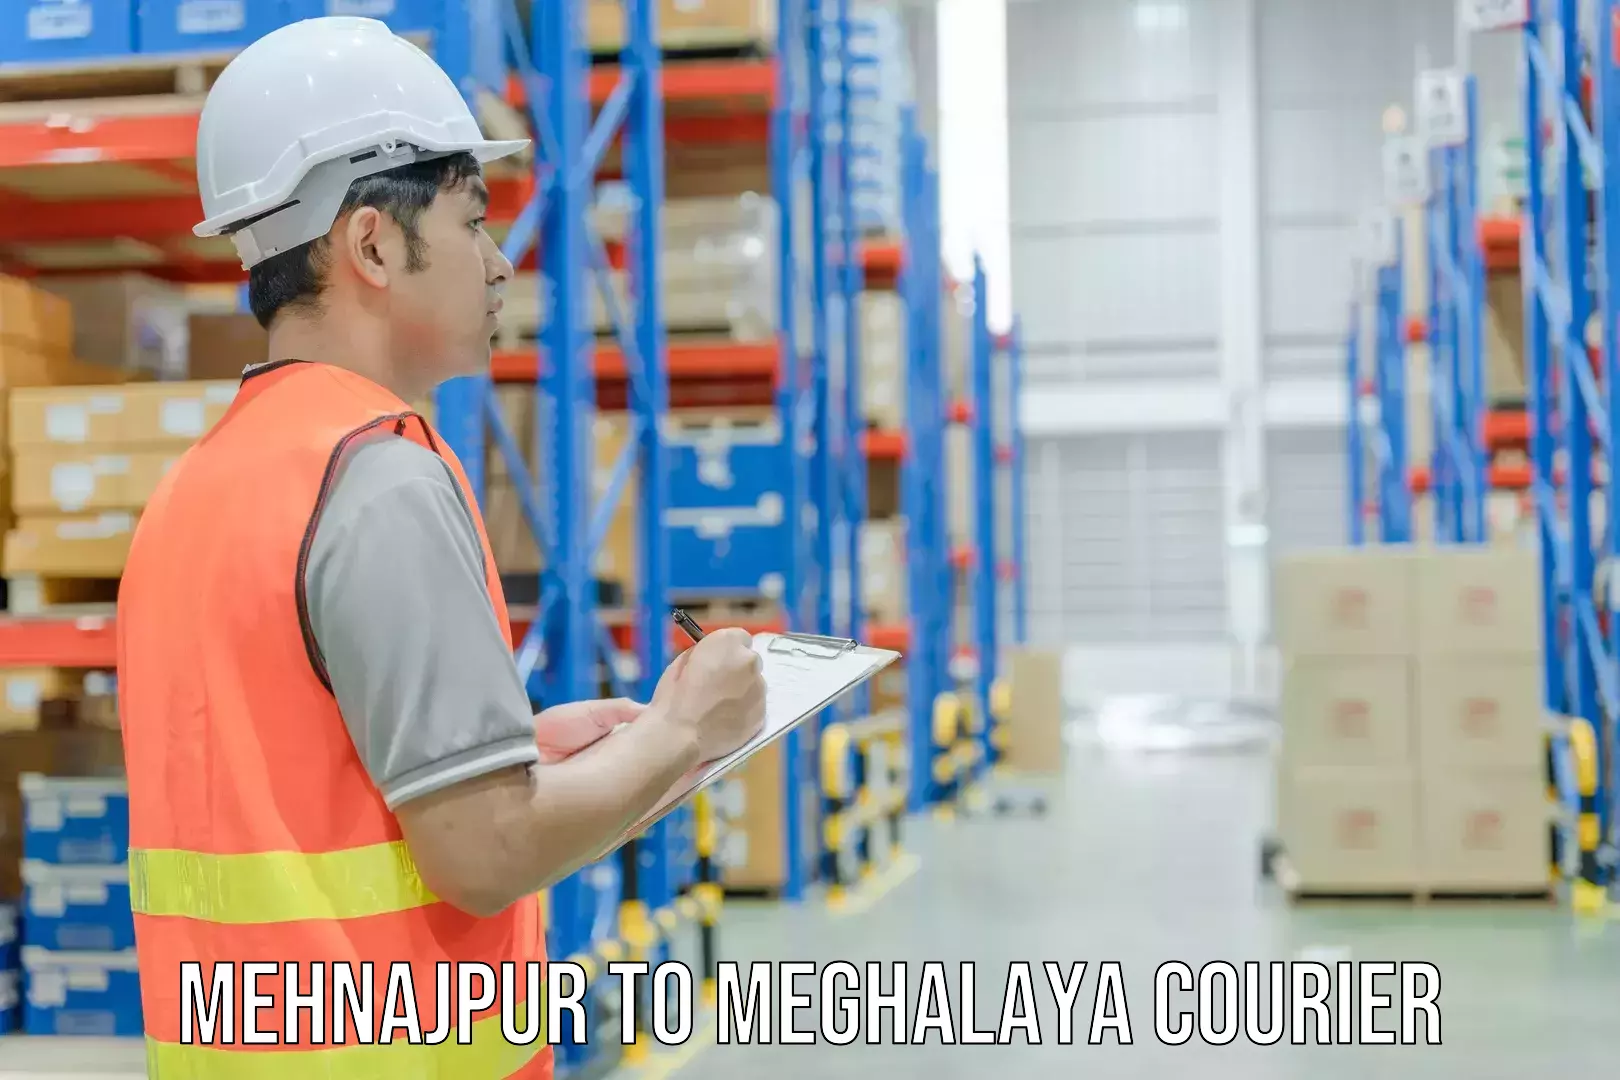 Courier service partnerships Mehnajpur to Tura